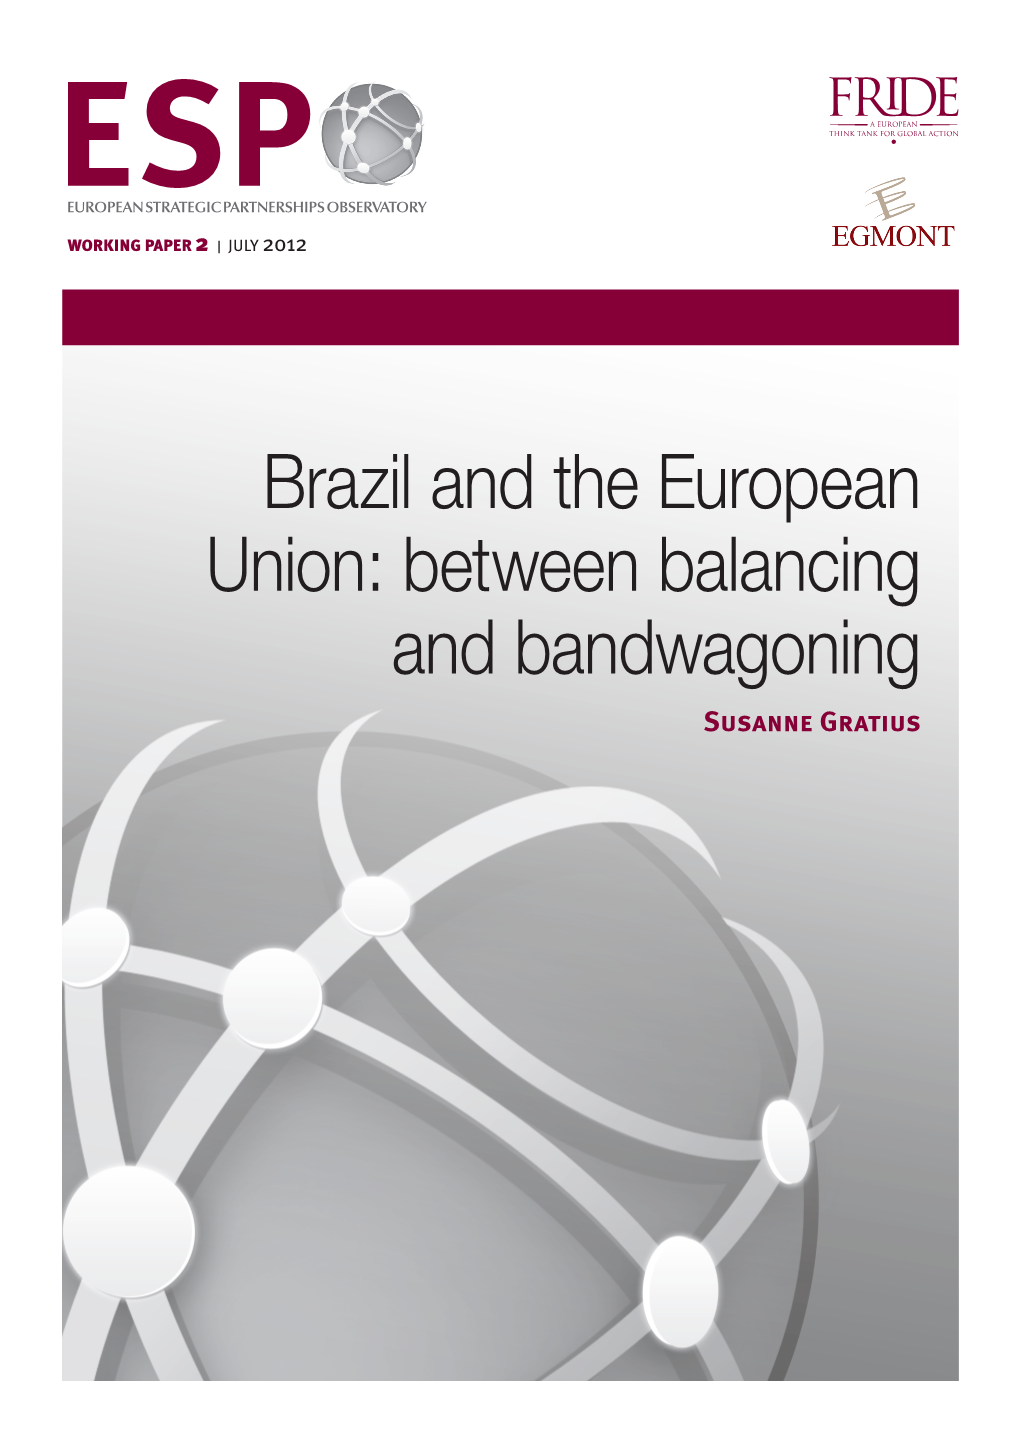 Brazil and the European Union: Between Balancing and Bandwagoning Susanne Gratius 2 ESPO Working Paper N.2 July 2012